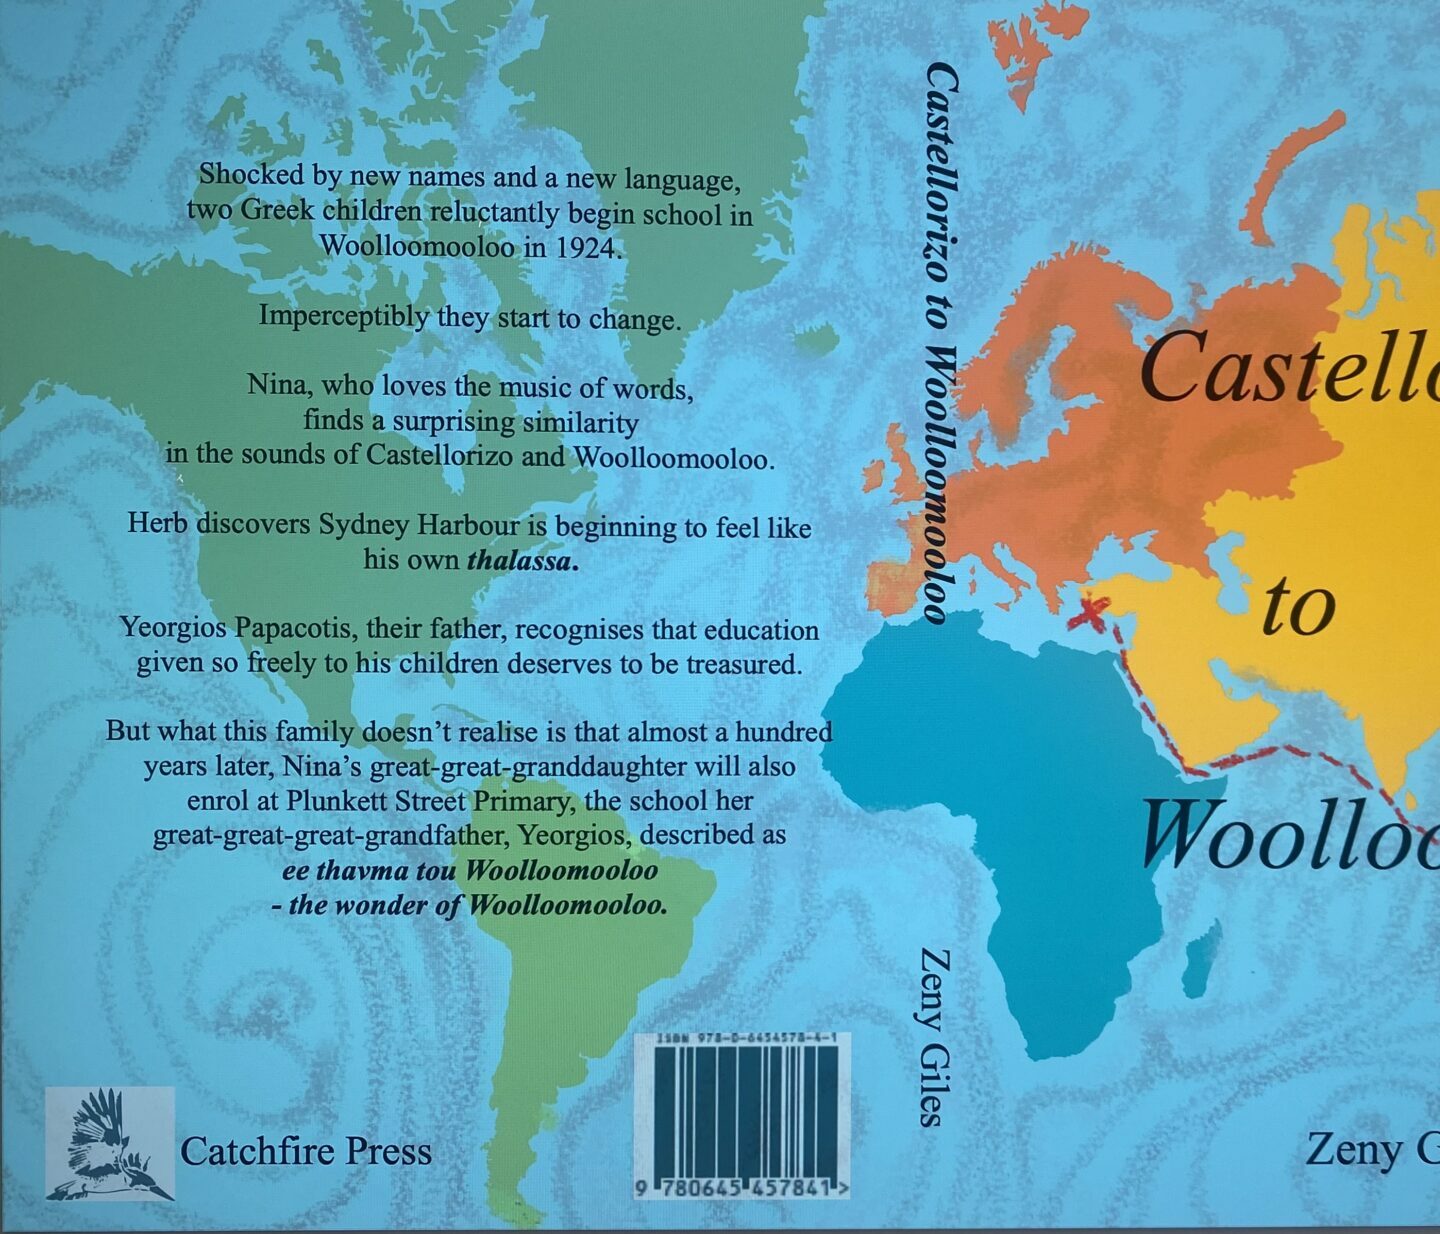 A blue book cover featuring a map with continents in different colours and a dotted line tracking from one red X in Greece to another on the east coast of Australia. The title is overlain in black text